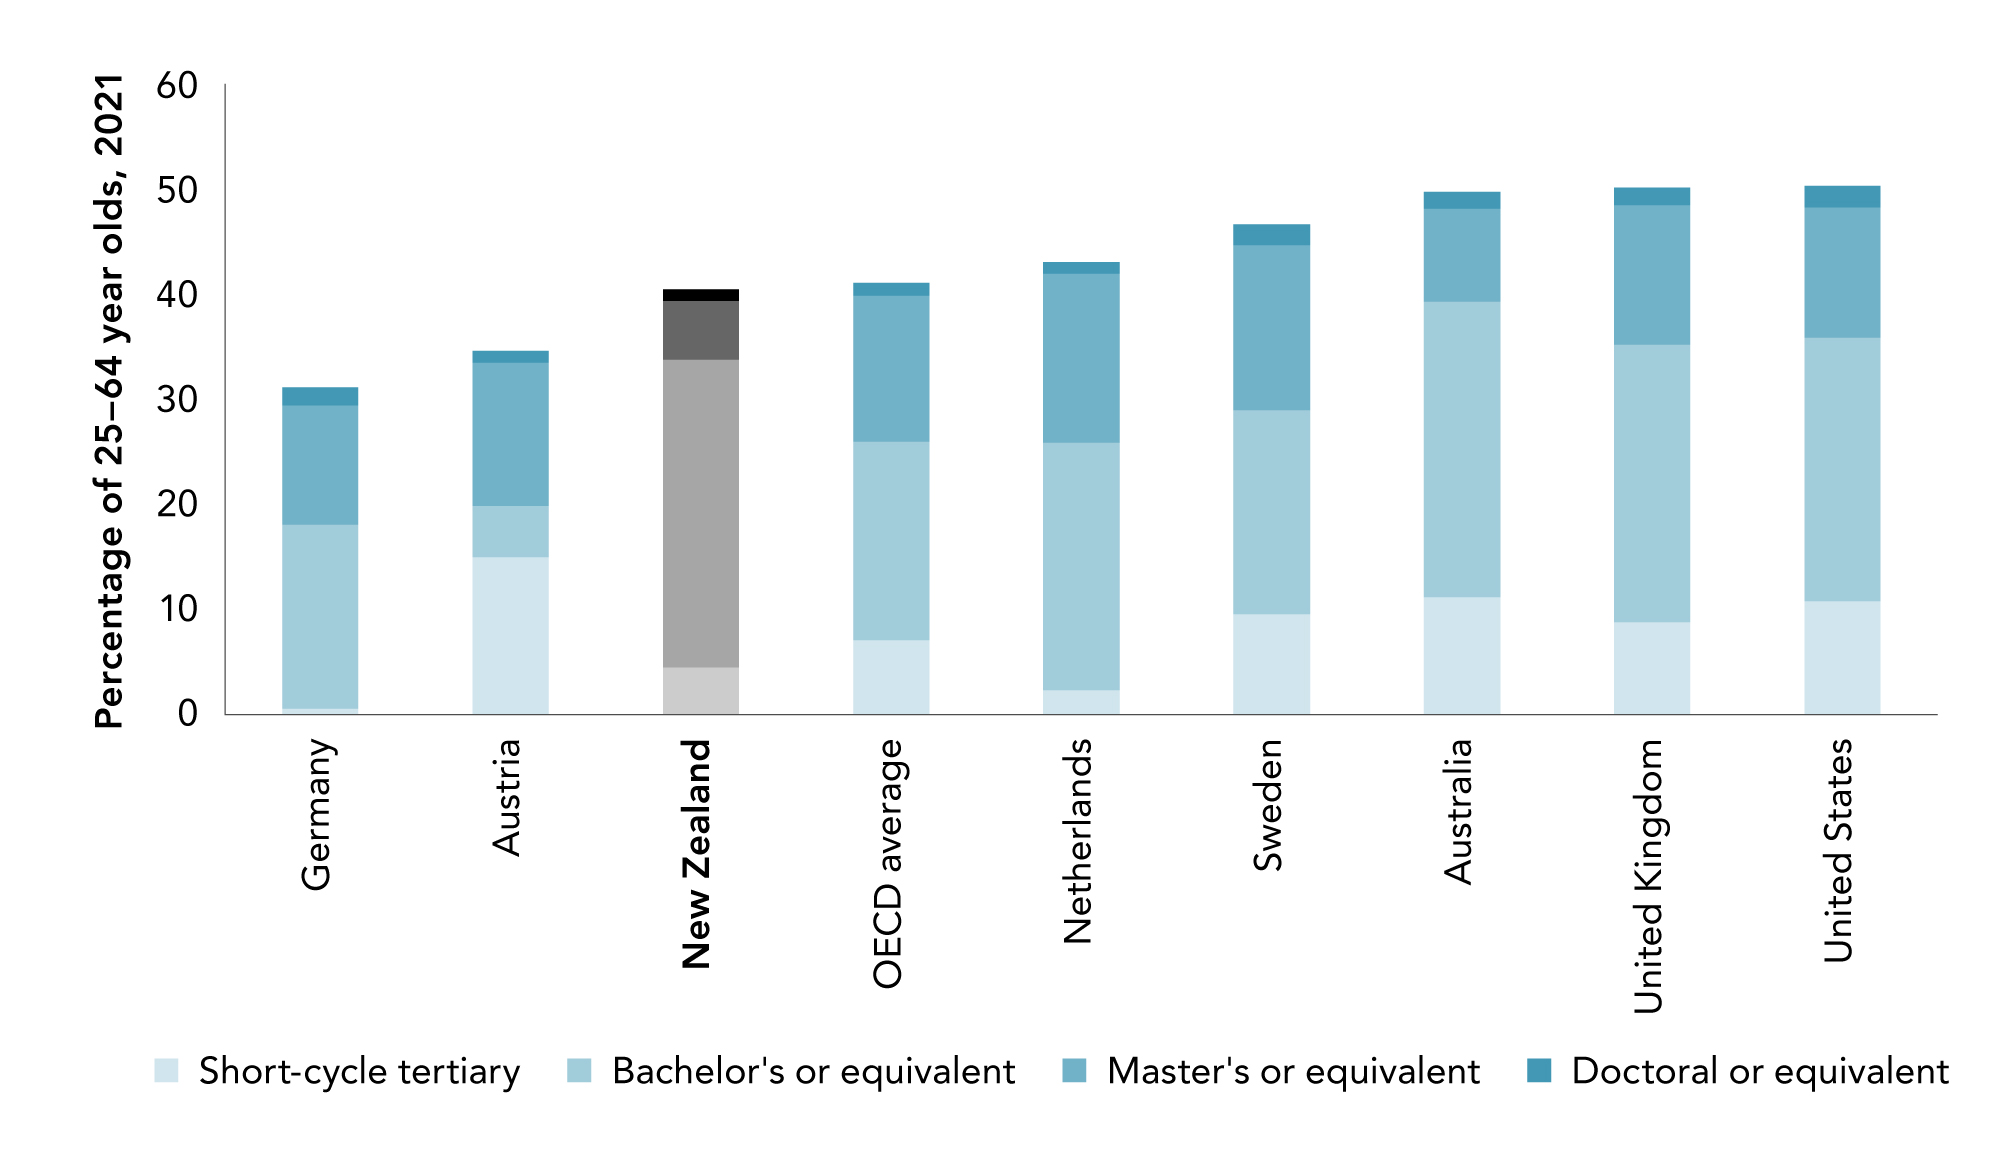 Figure 4.14 Tertiary qualifications levels are about average in the working age population